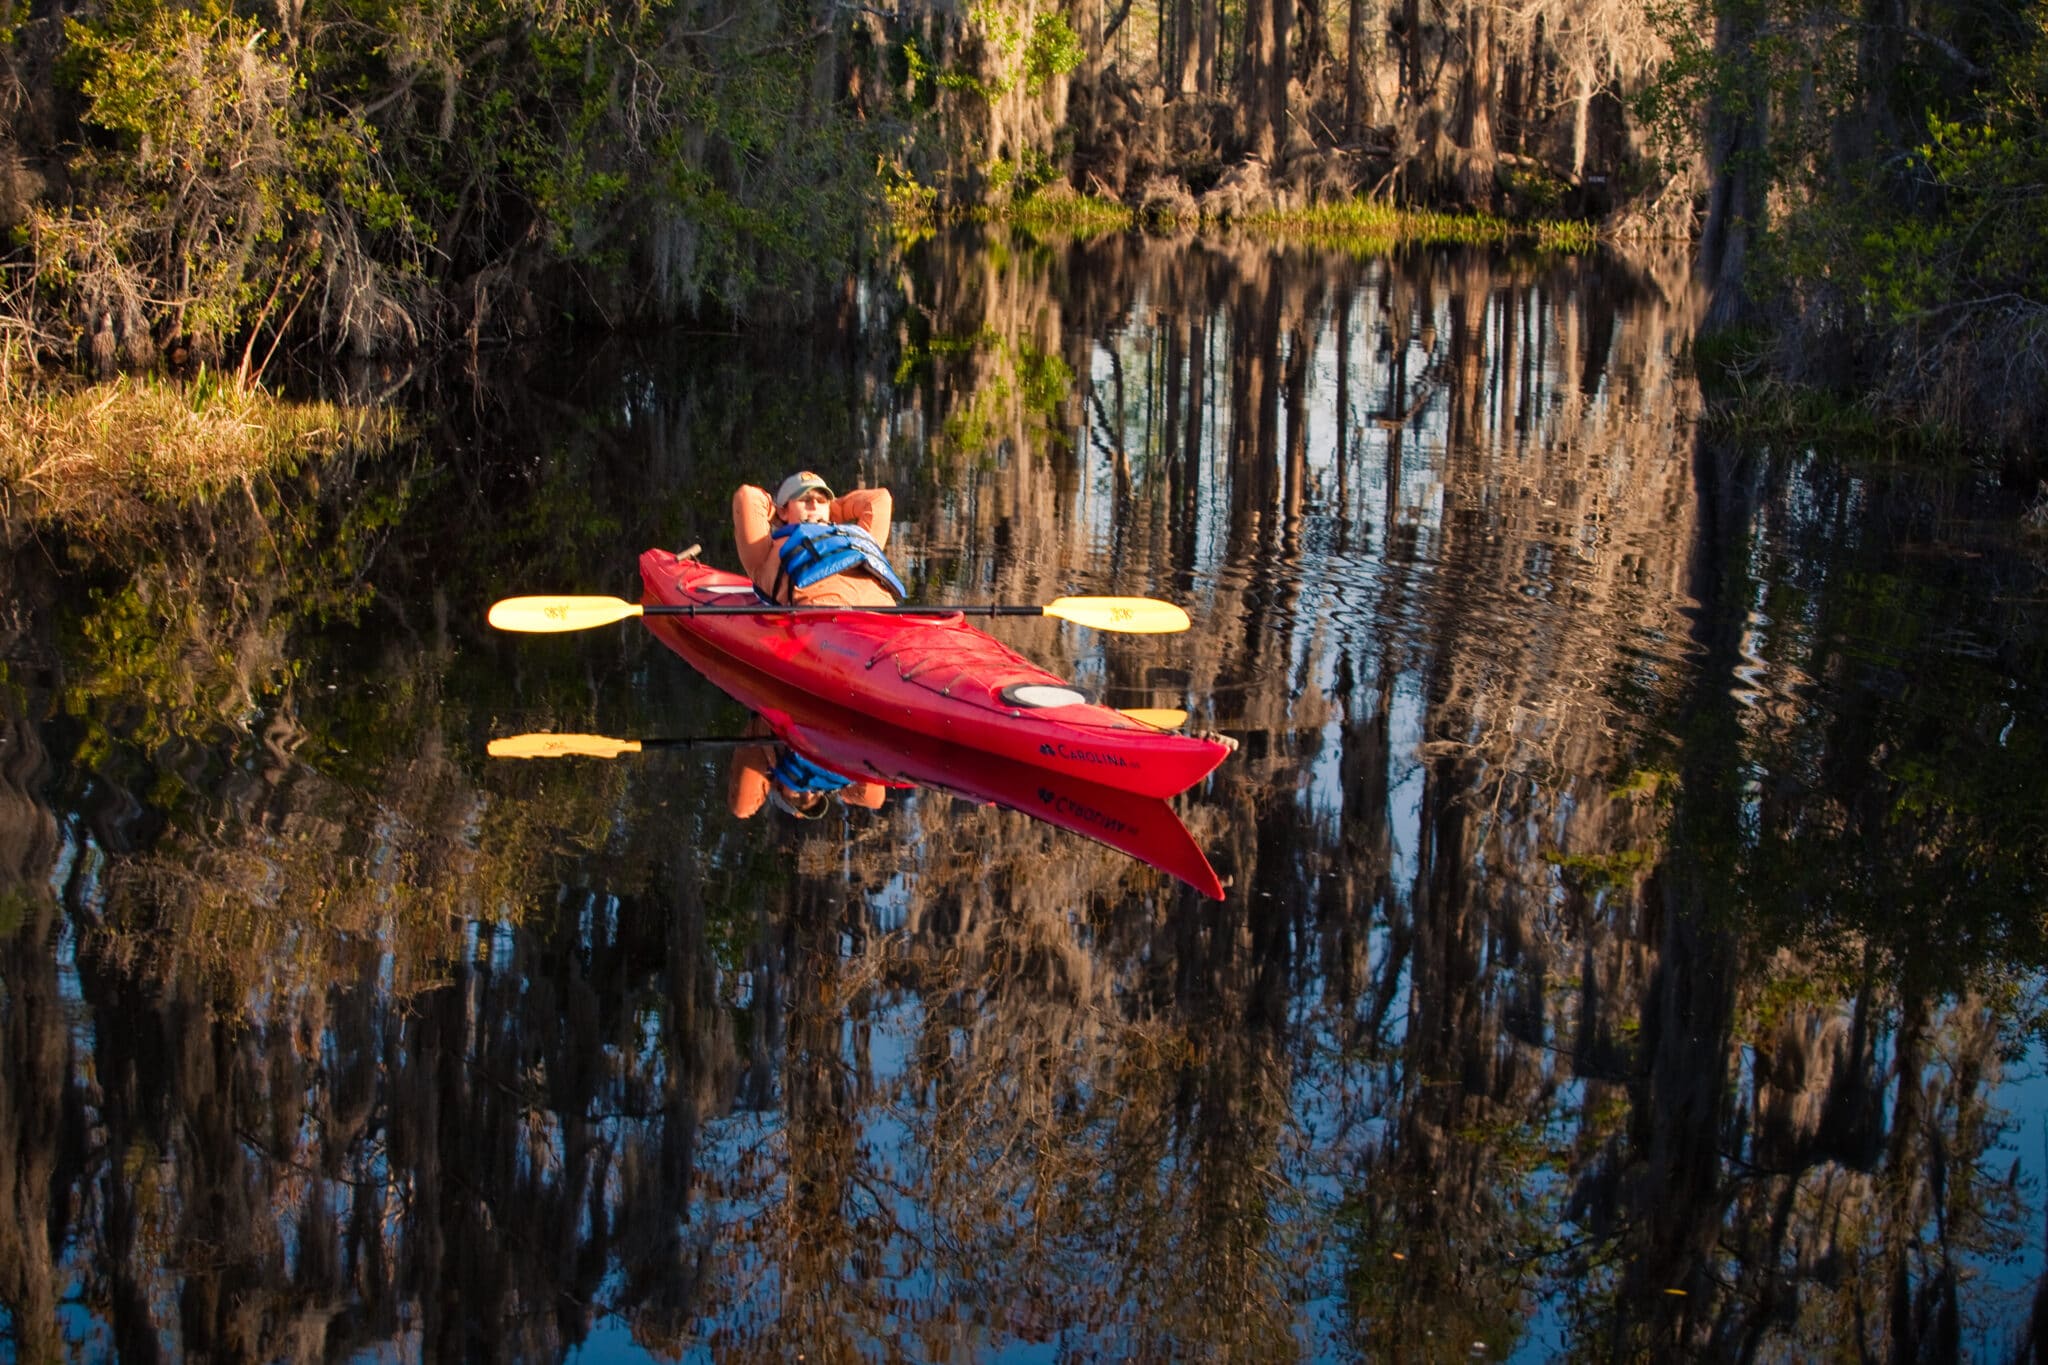 Should mining be allowed near the Okefenokee Swamp?